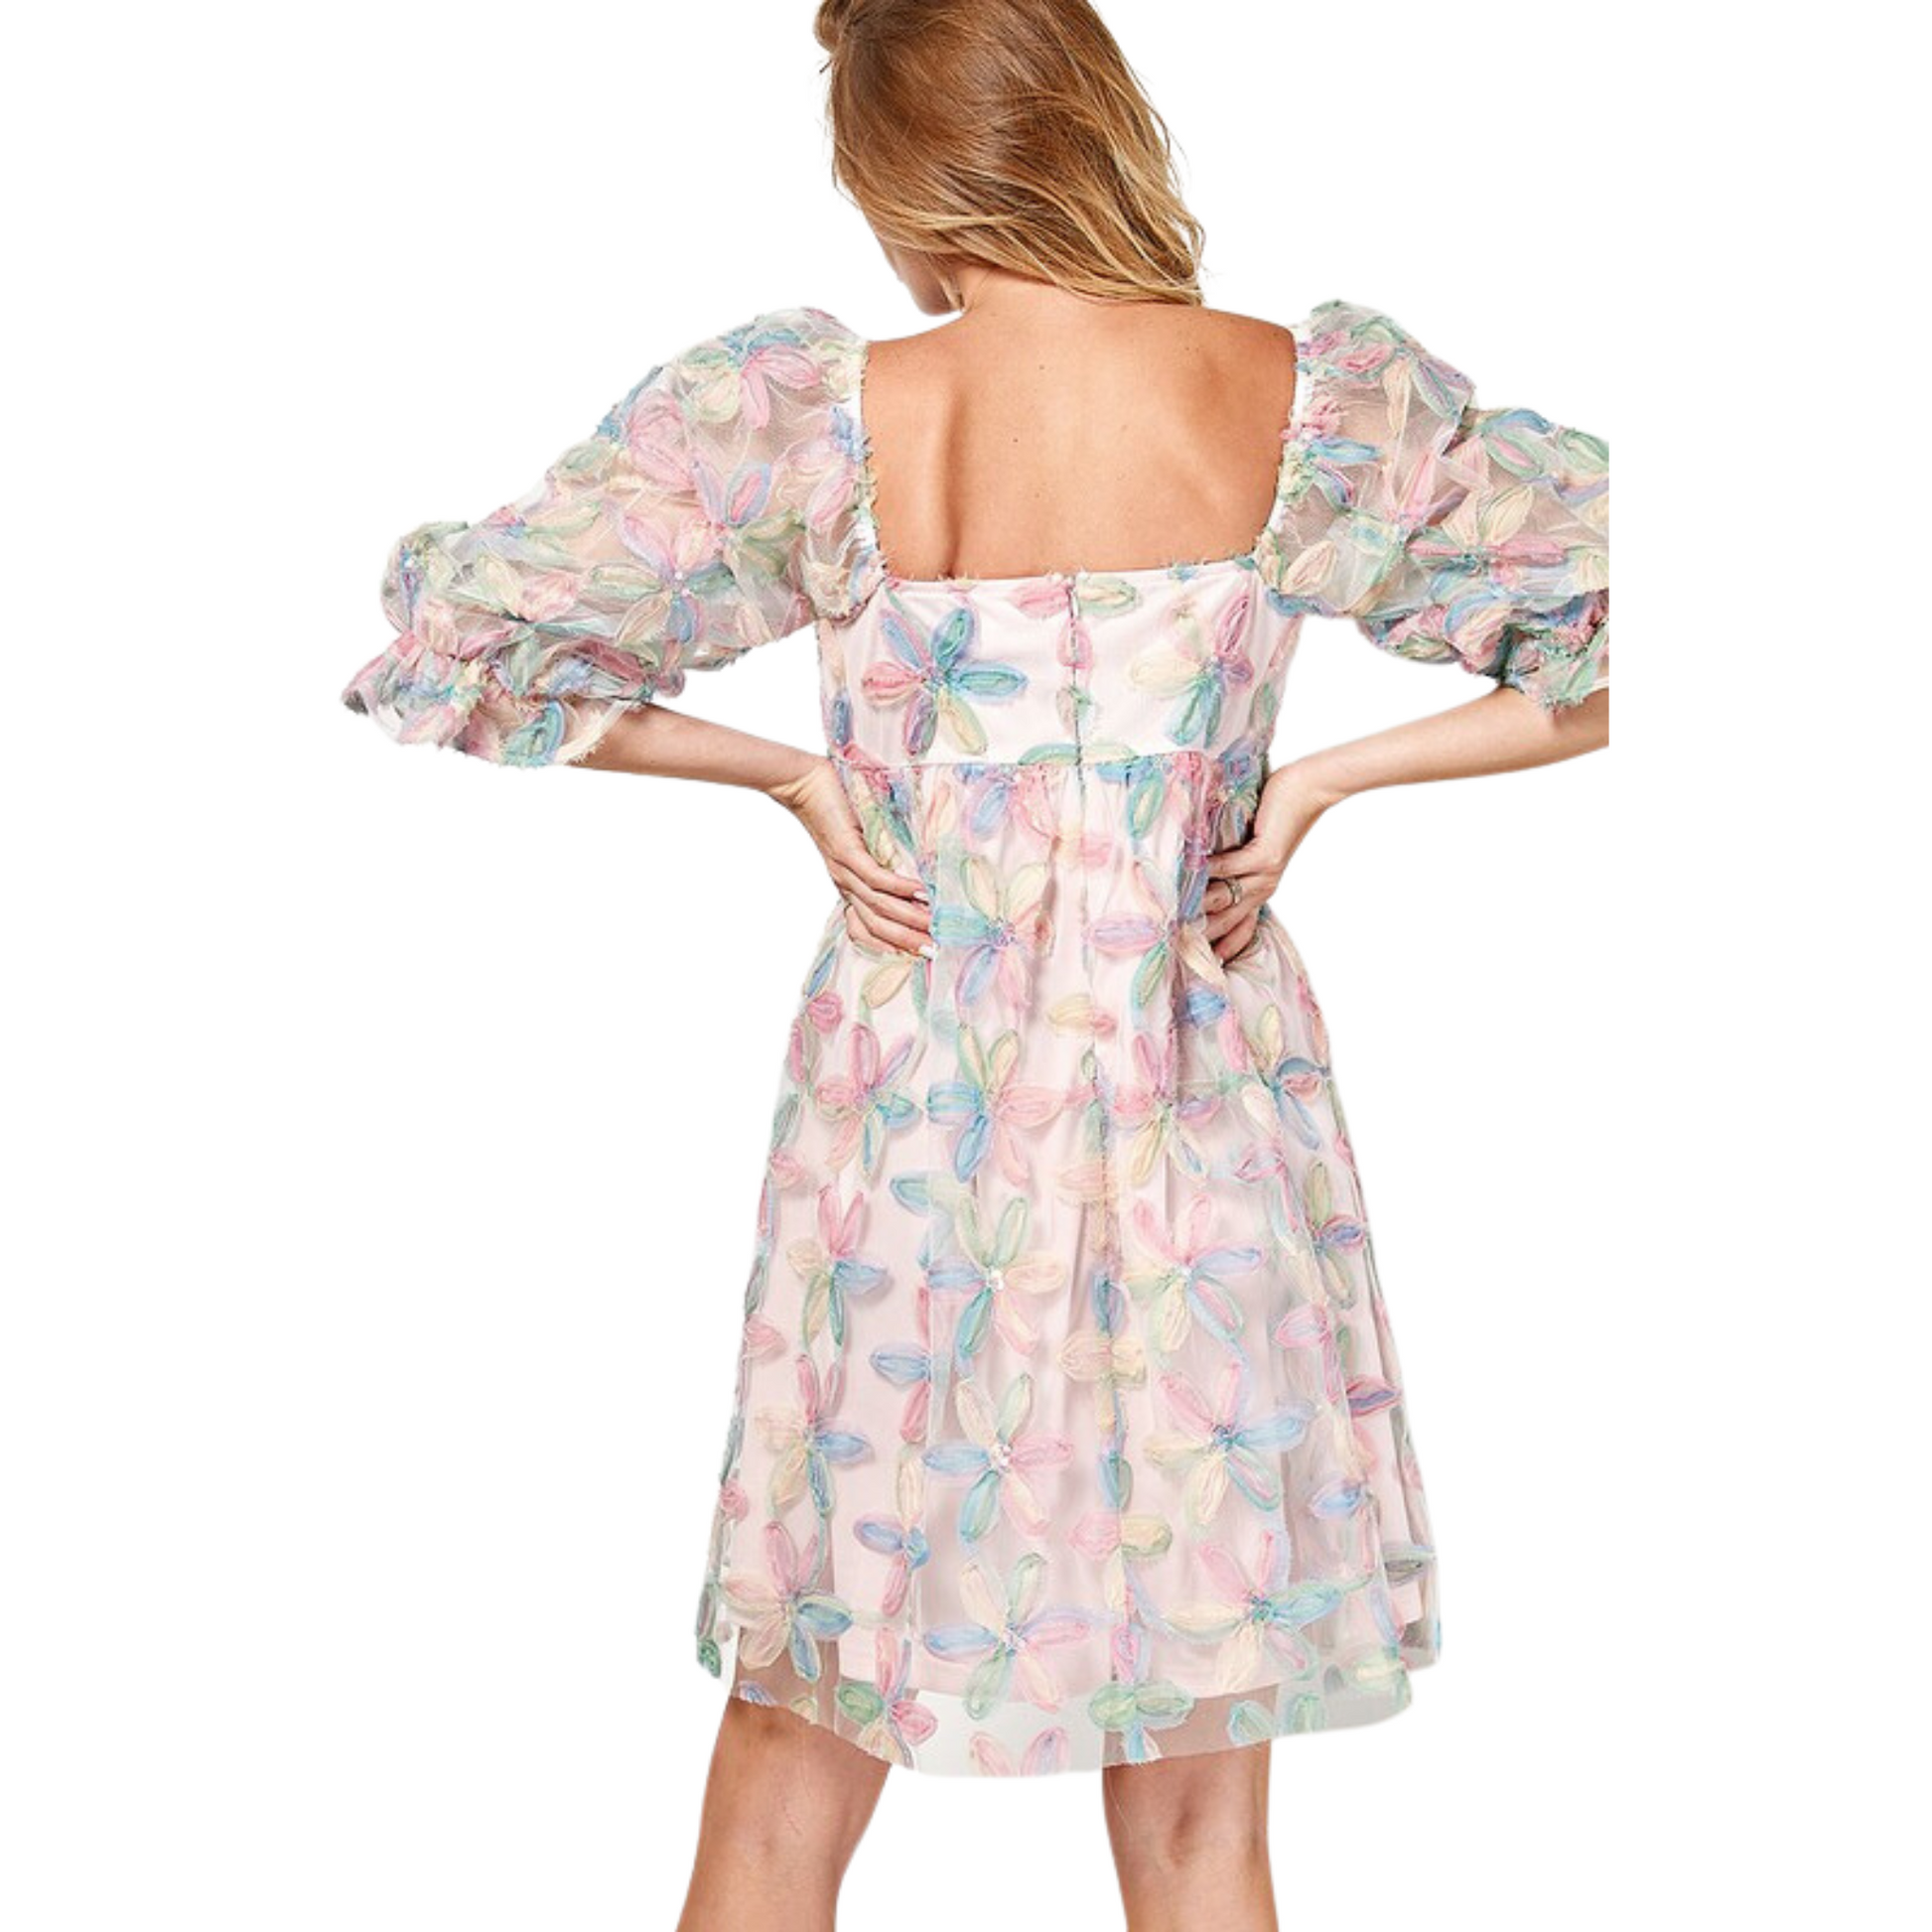 This Flower Detail Babydoll Dress is perfect for a special evening out! Its unique 3D design and sheer overlay provide a beautiful contrast, while the mini dress silhouette will flatter any body type. Look and feel amazing in this gorgeous dress!